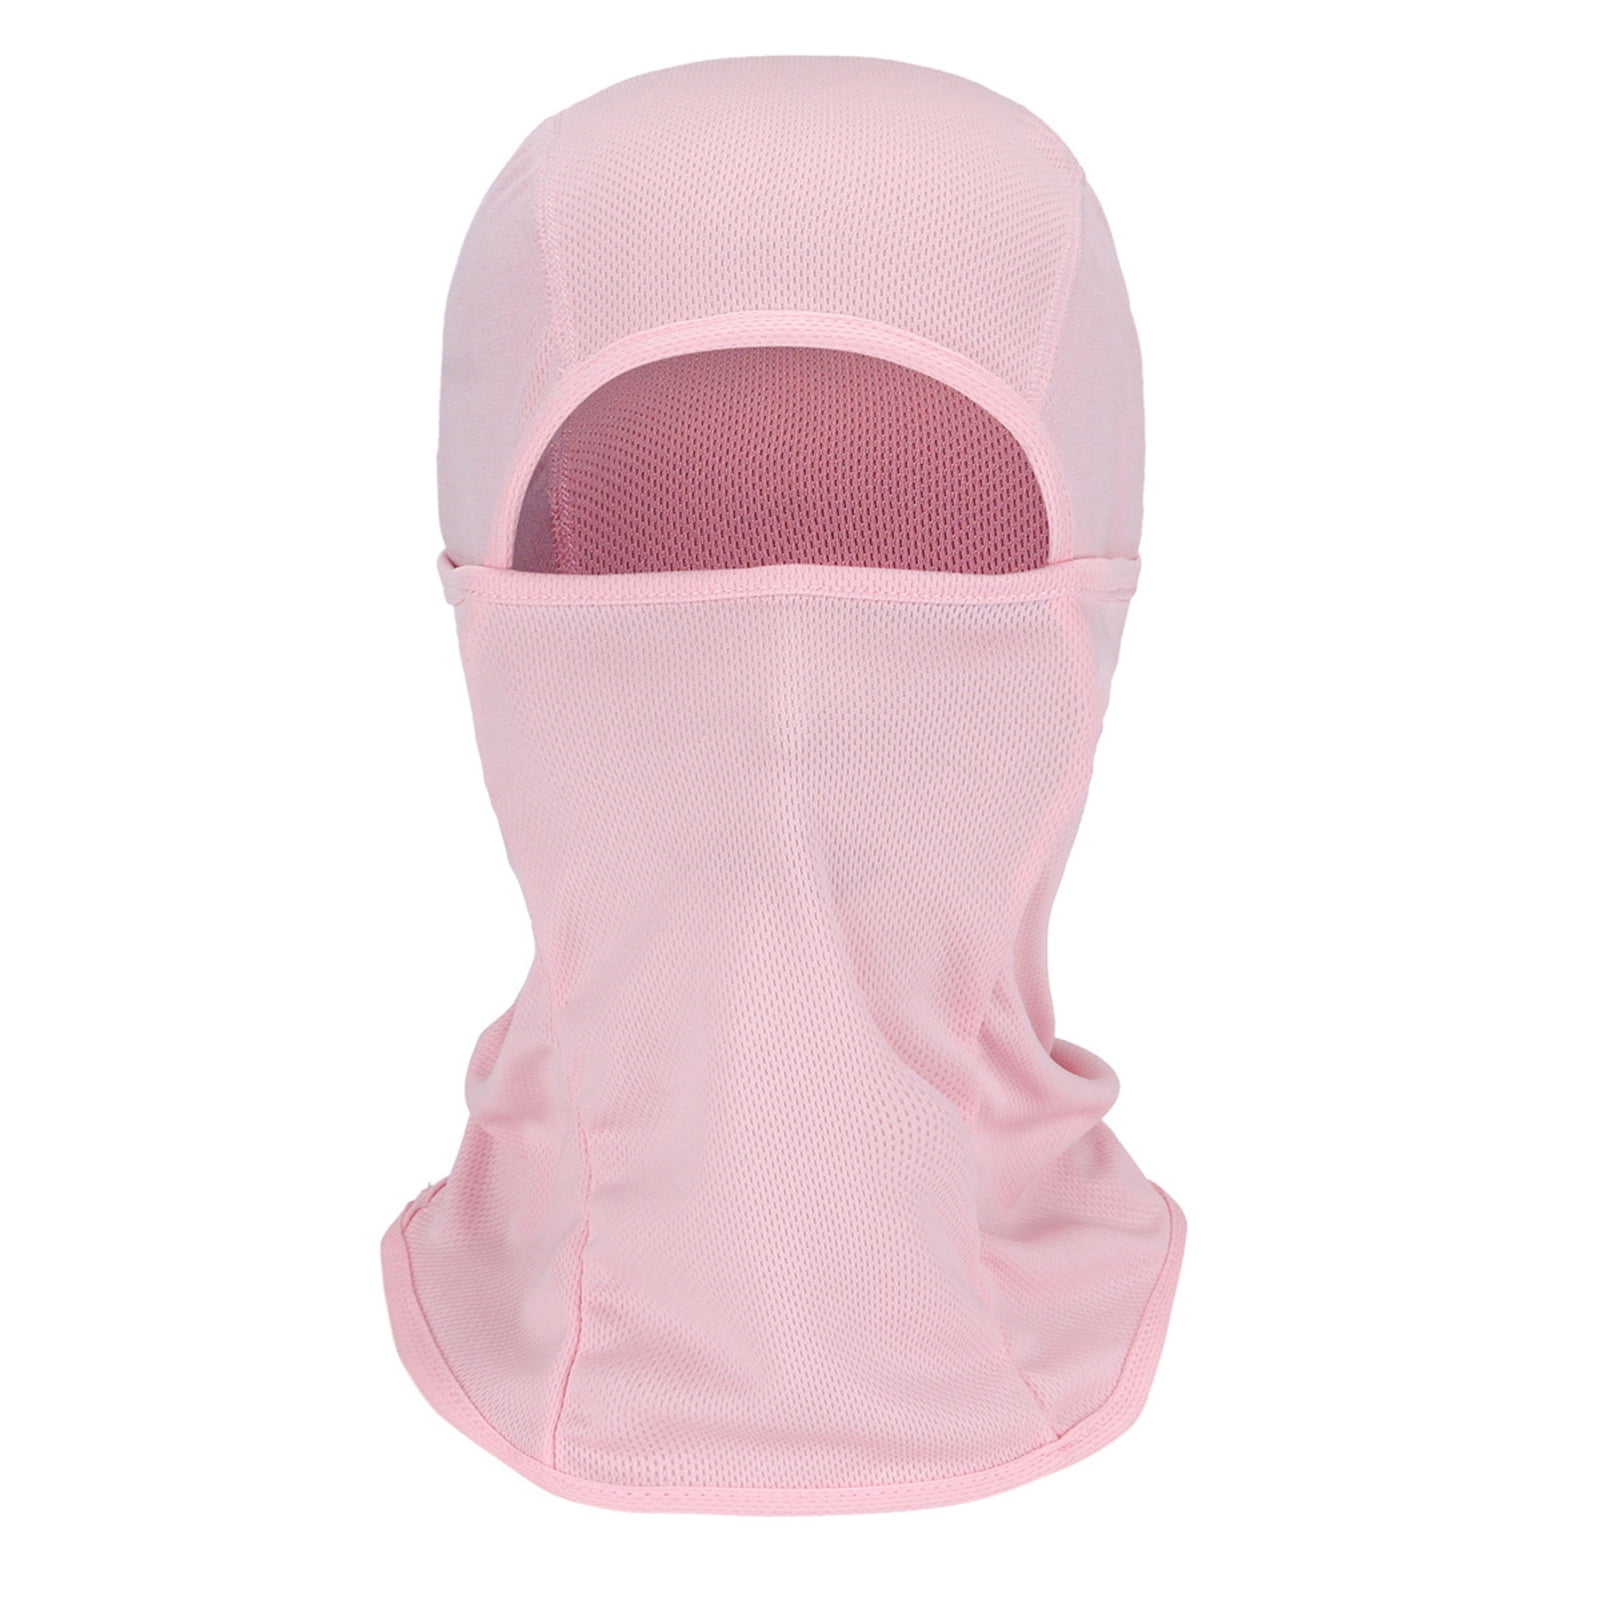 Details about   BG_ Unisex Winter Balaclava Hat Face Cover for Skiing Snowboarding Motorcycle Ri 